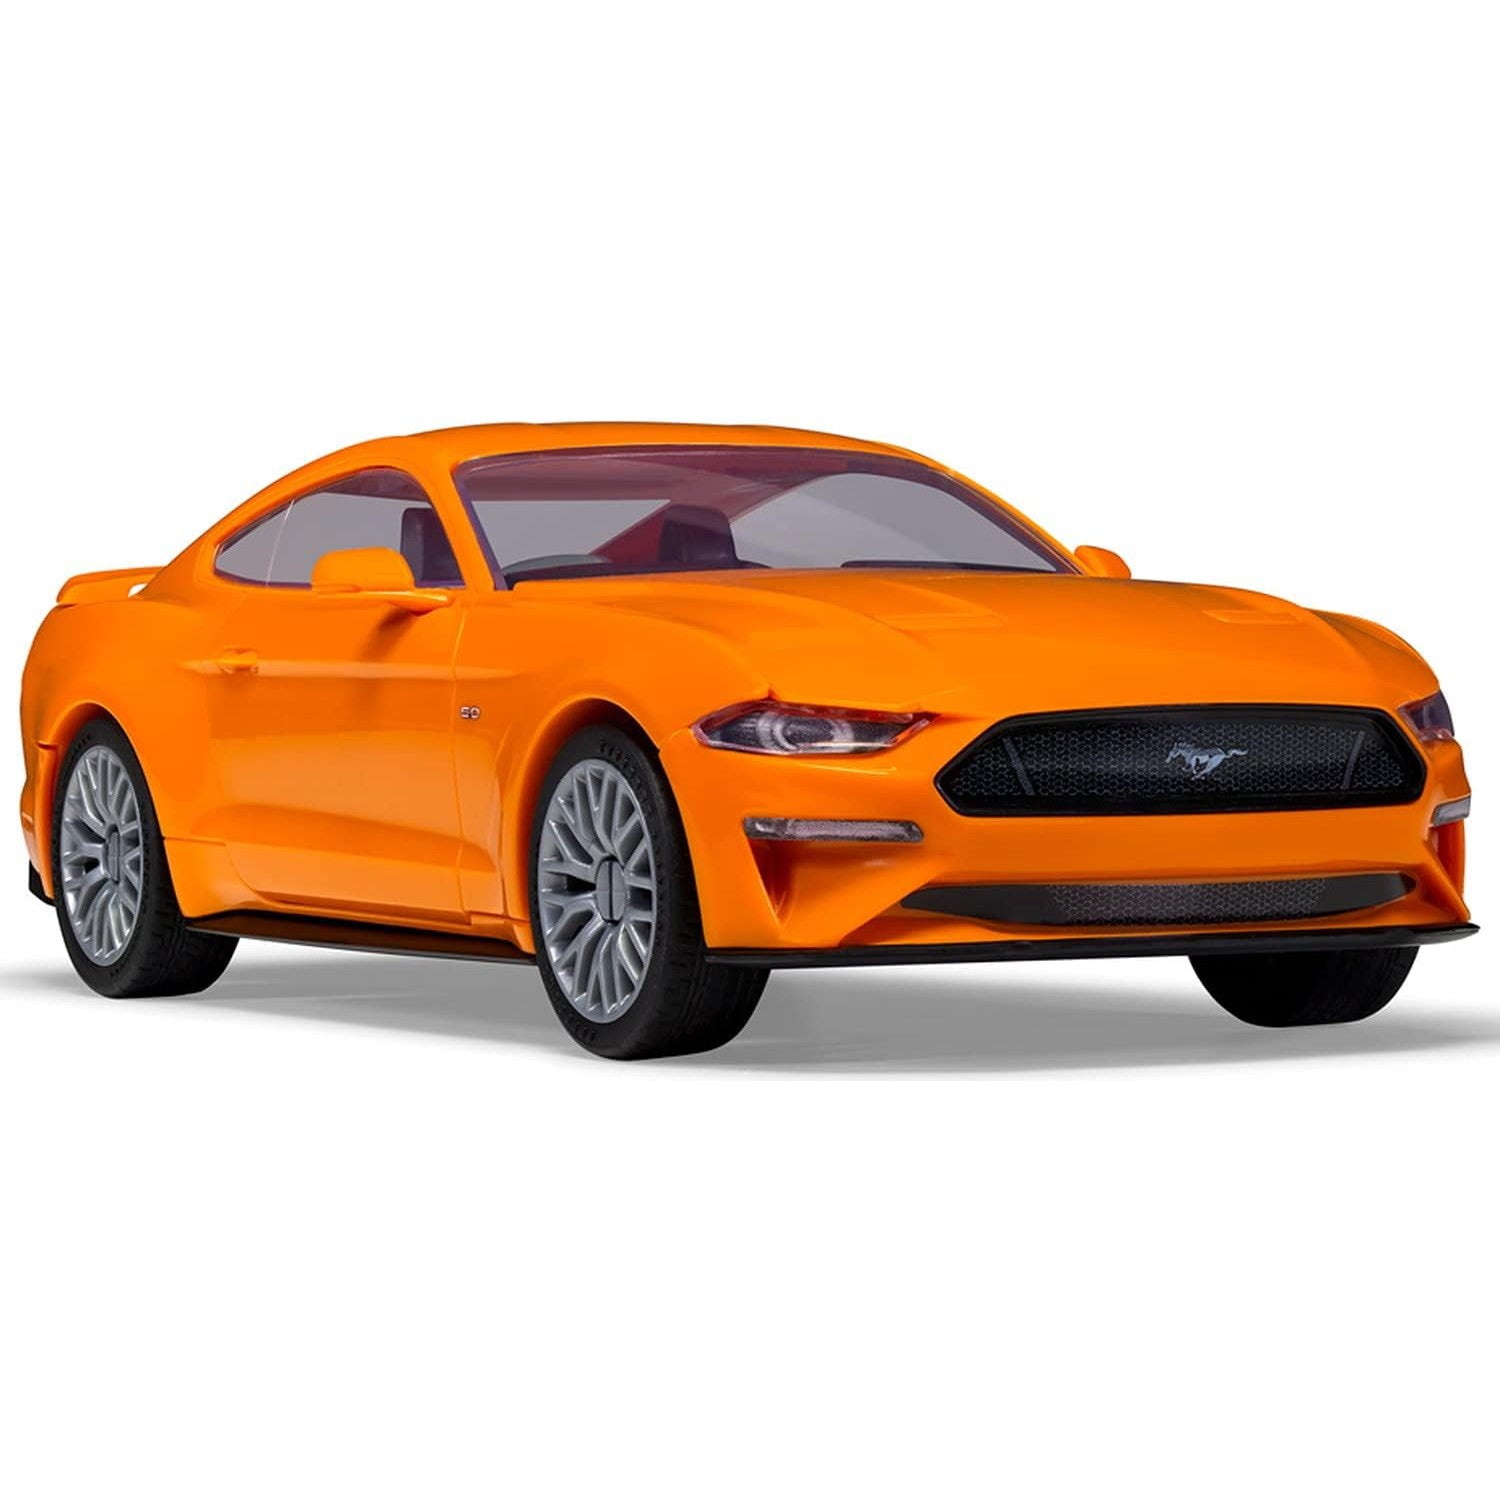 Airfix J6036 Ford Mustang GT - New